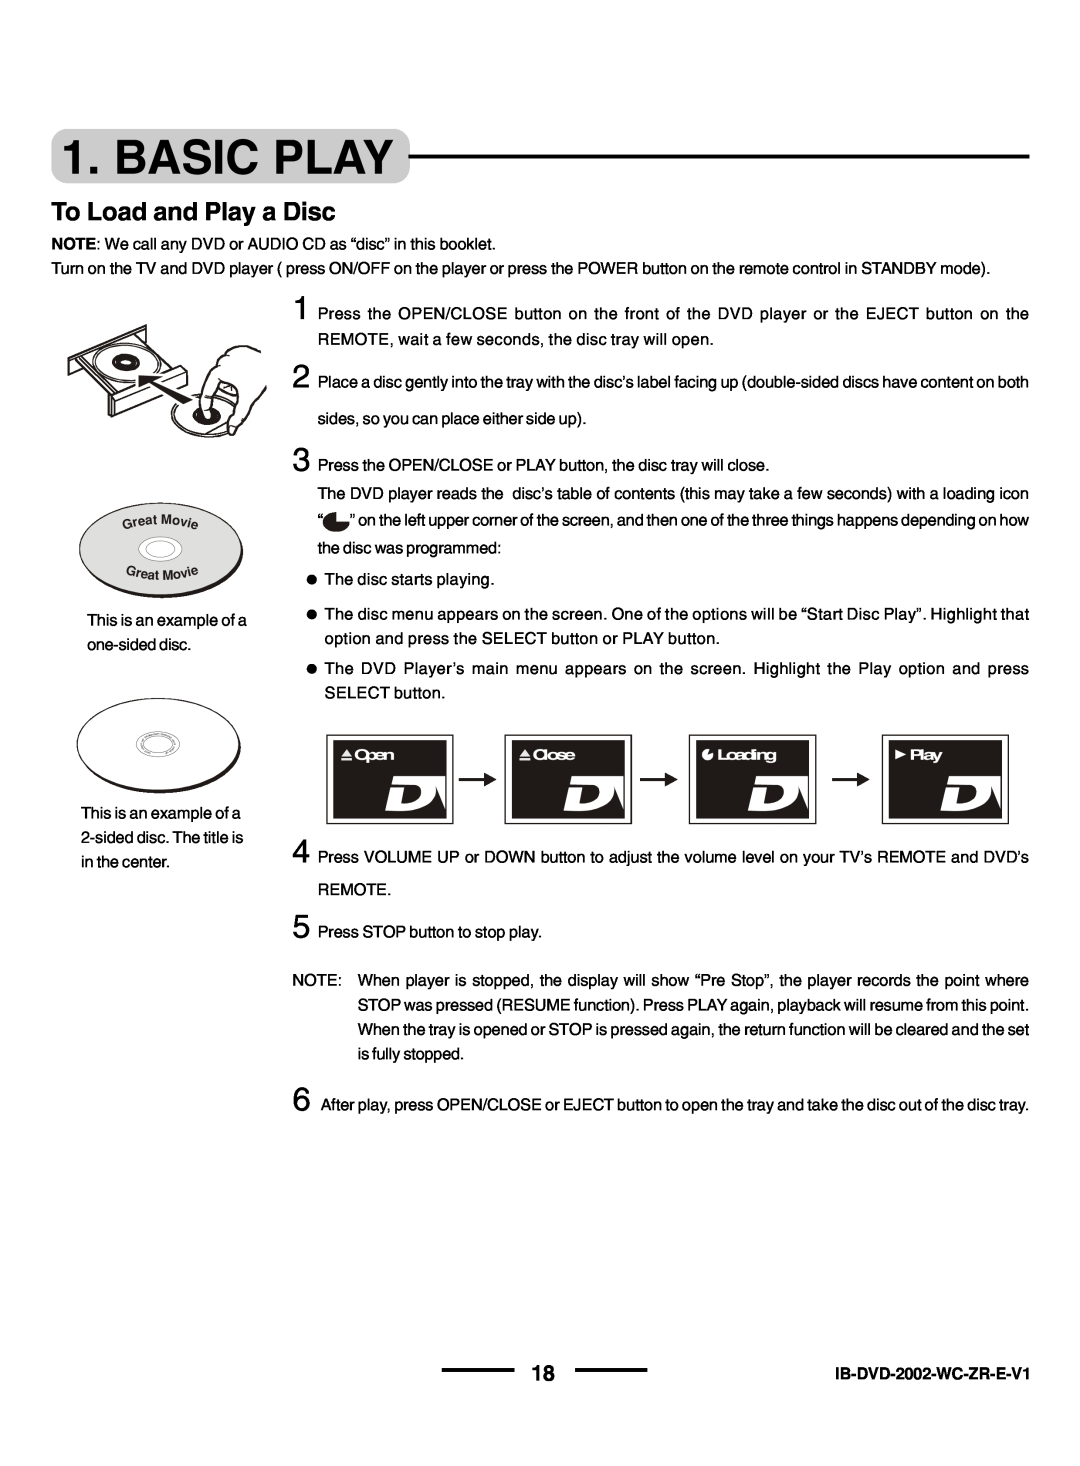 Lenoxx Electronics DVD-2002 instruction manual Basic Play, To Load and Play a Disc 